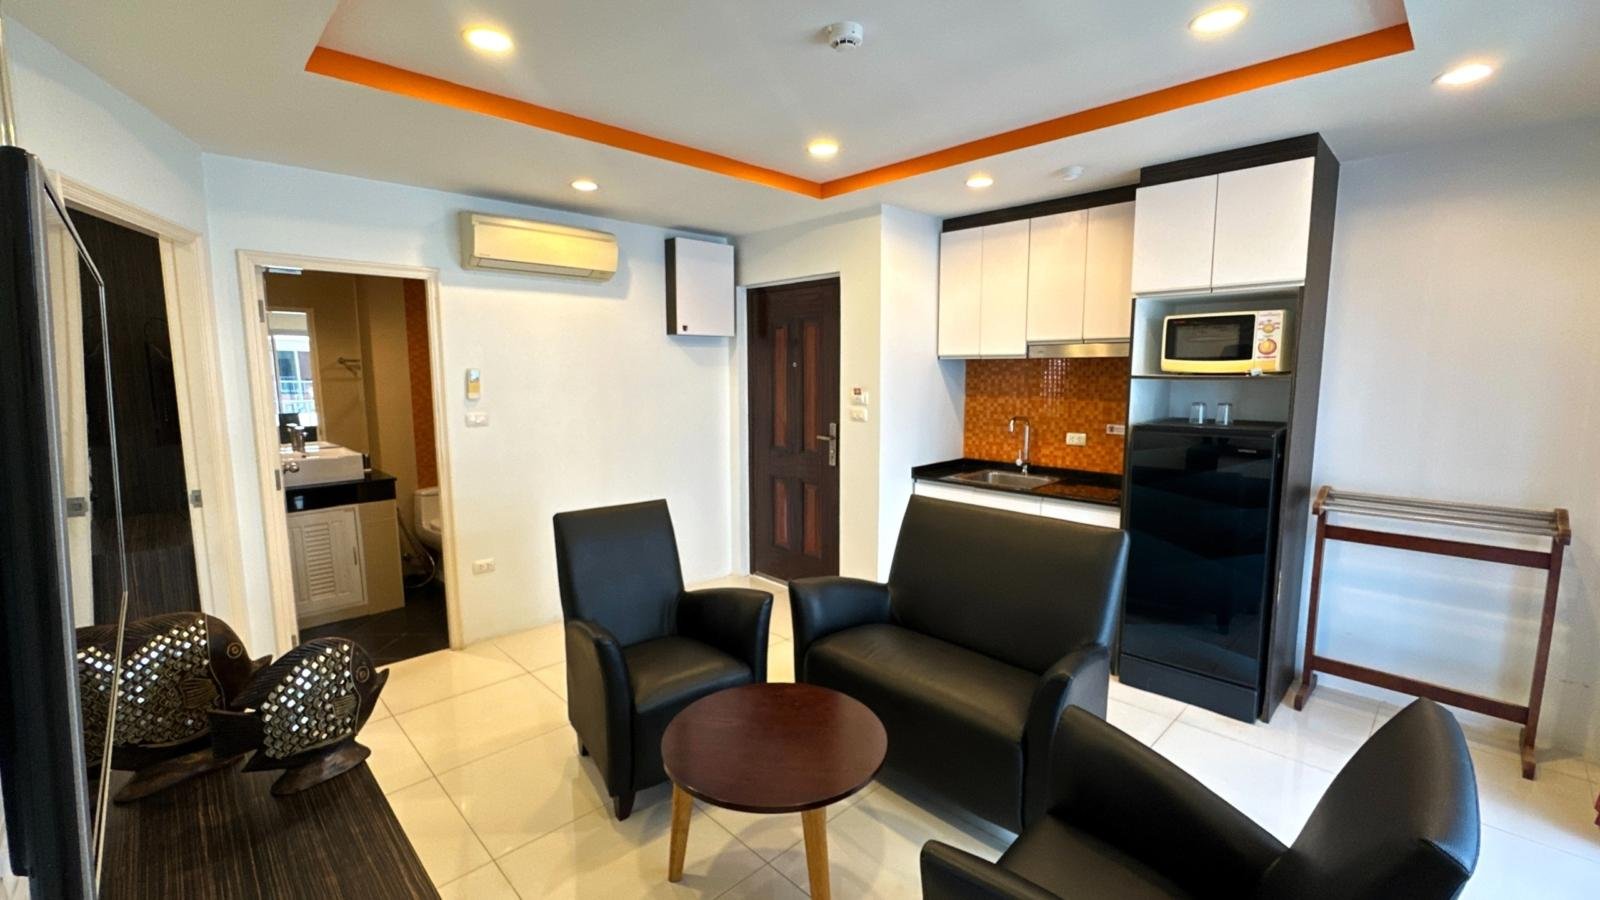 New Nordic Suite 2 bedroom apartment for rent Pattaya